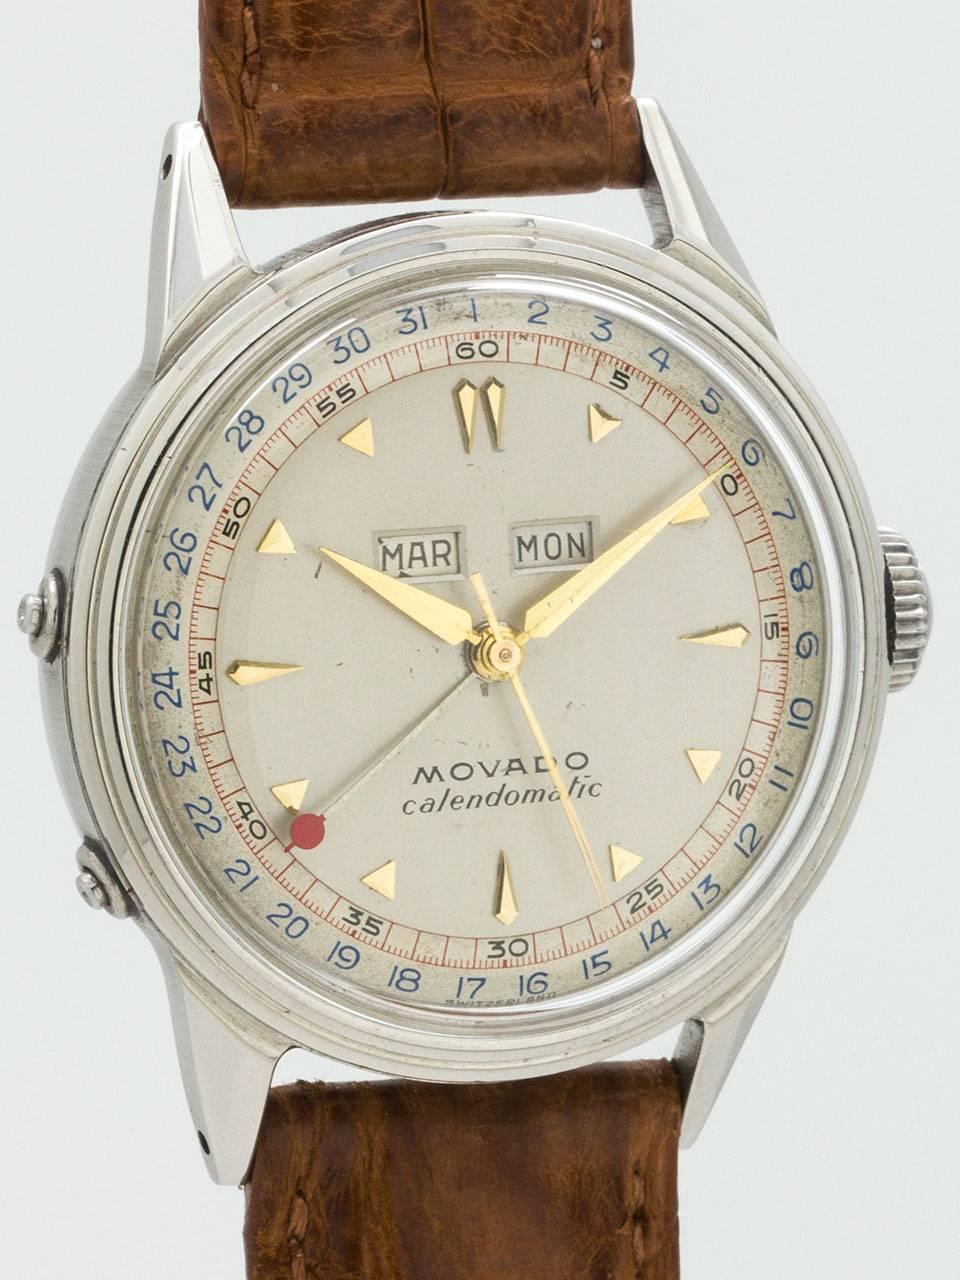 Great looking vintage Movado Calendomatic circa 1950s. Featuring 35mm diameter stepped case with screw down case back and acrylic crystal. Very pleasing 2 tone original silvered satin dial with gold applied triangular indexes and tapered gilt hands.